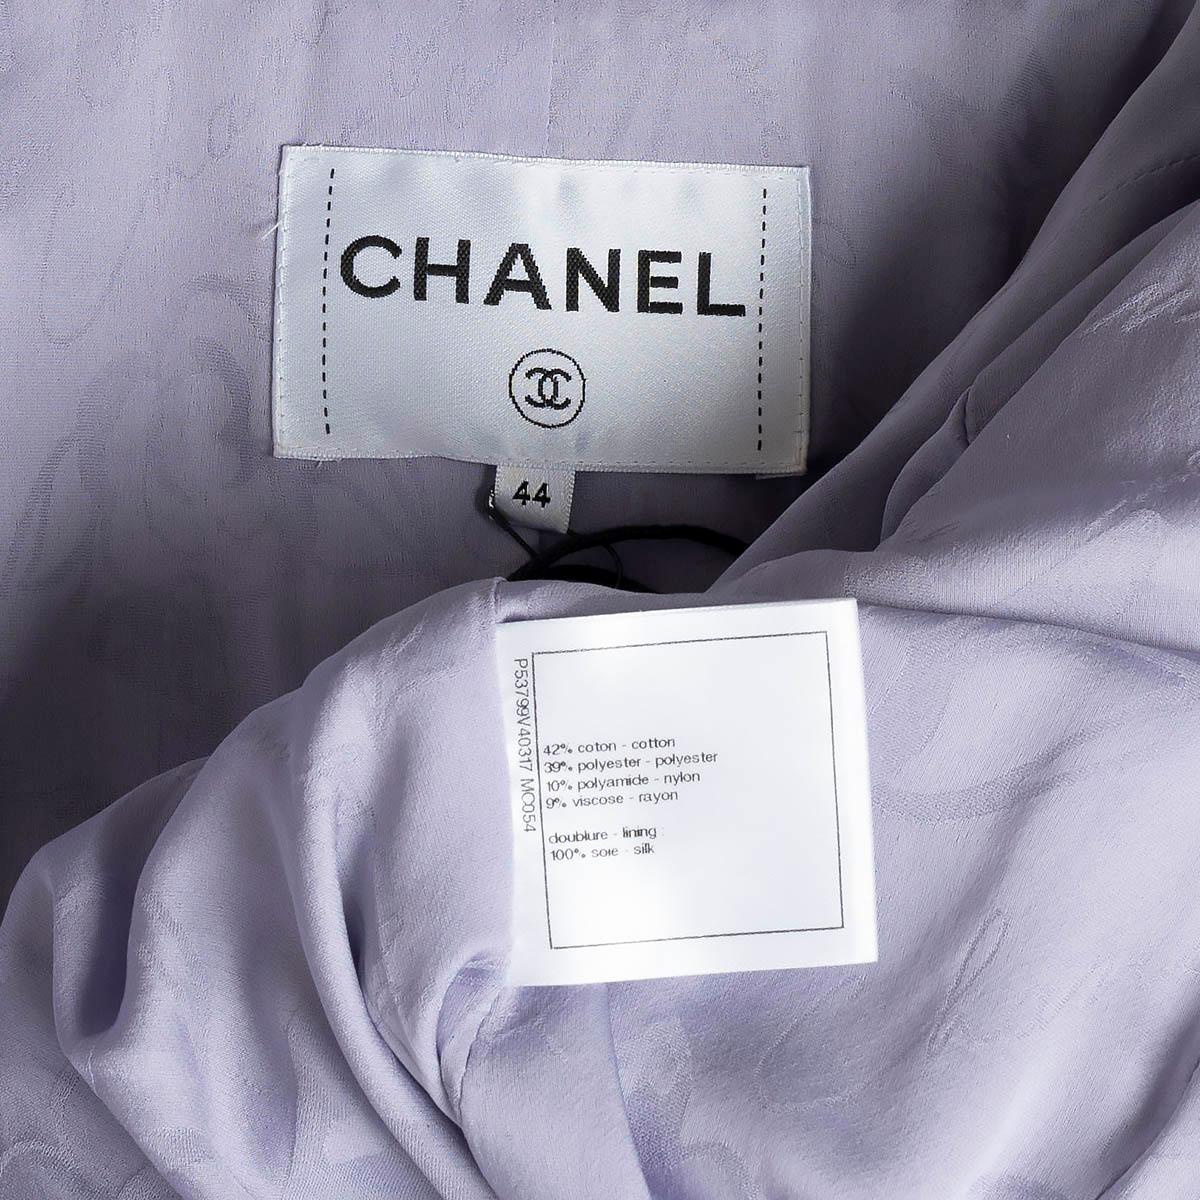 CHANEL lilac cotton 2016 16S SHAWL COLLAR IRIDESCENT TWEED Jacket 44 XL For Sale 4